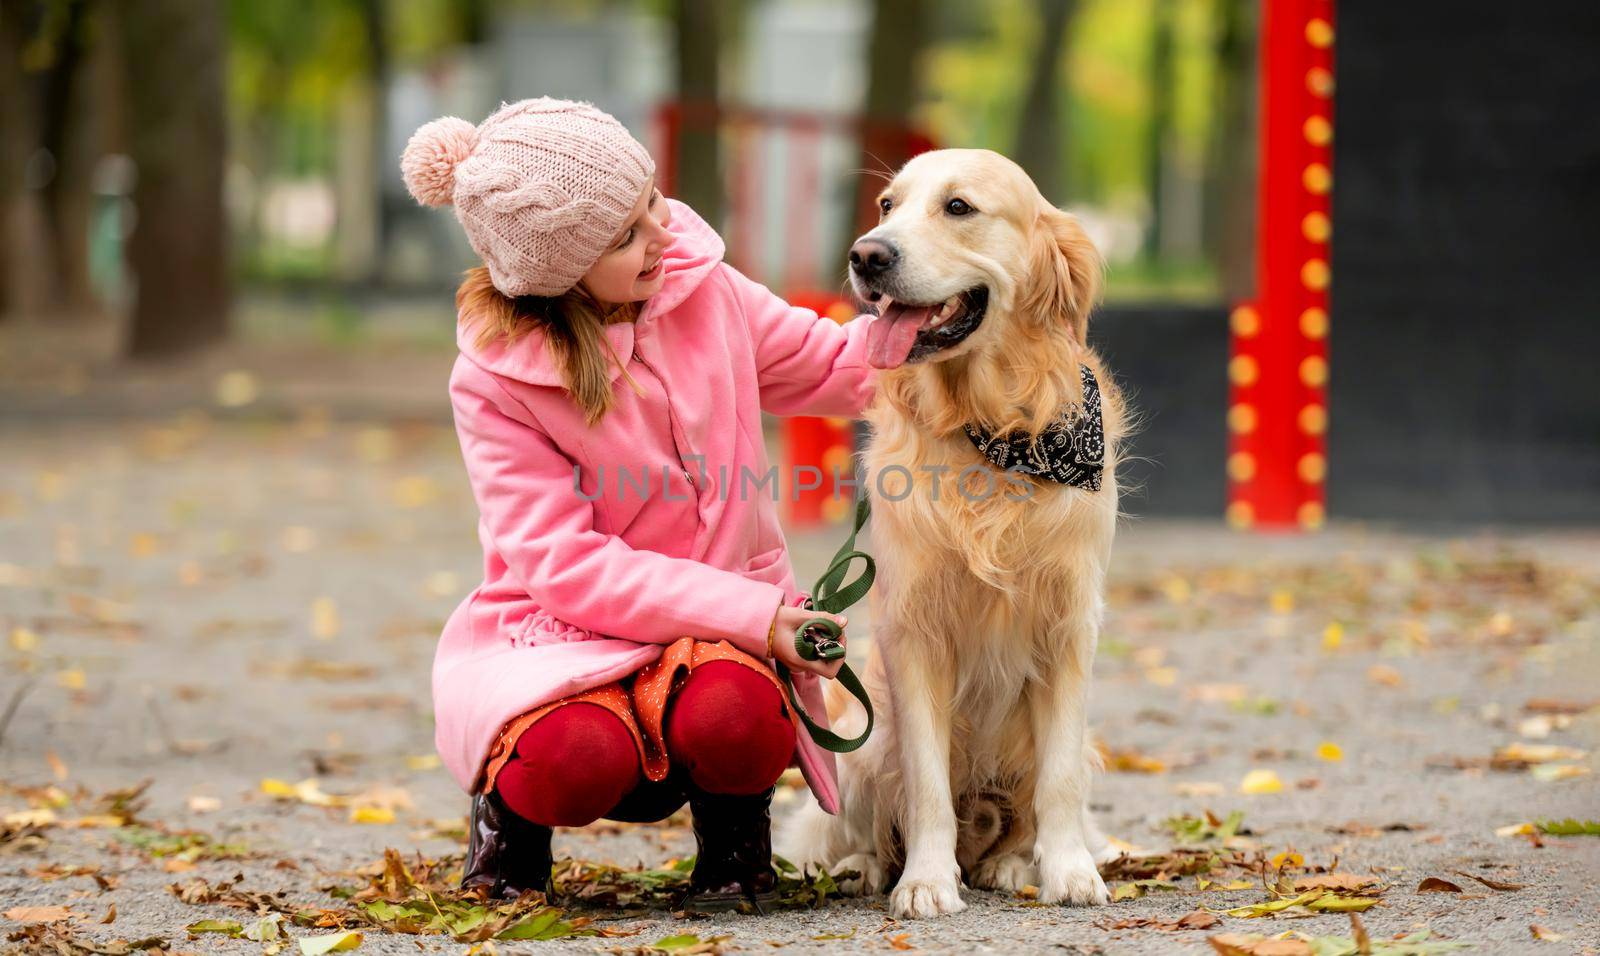 Preteen girl kid with golden retriever dog sitting in the park and petting doggy. Female child with pet at autumn